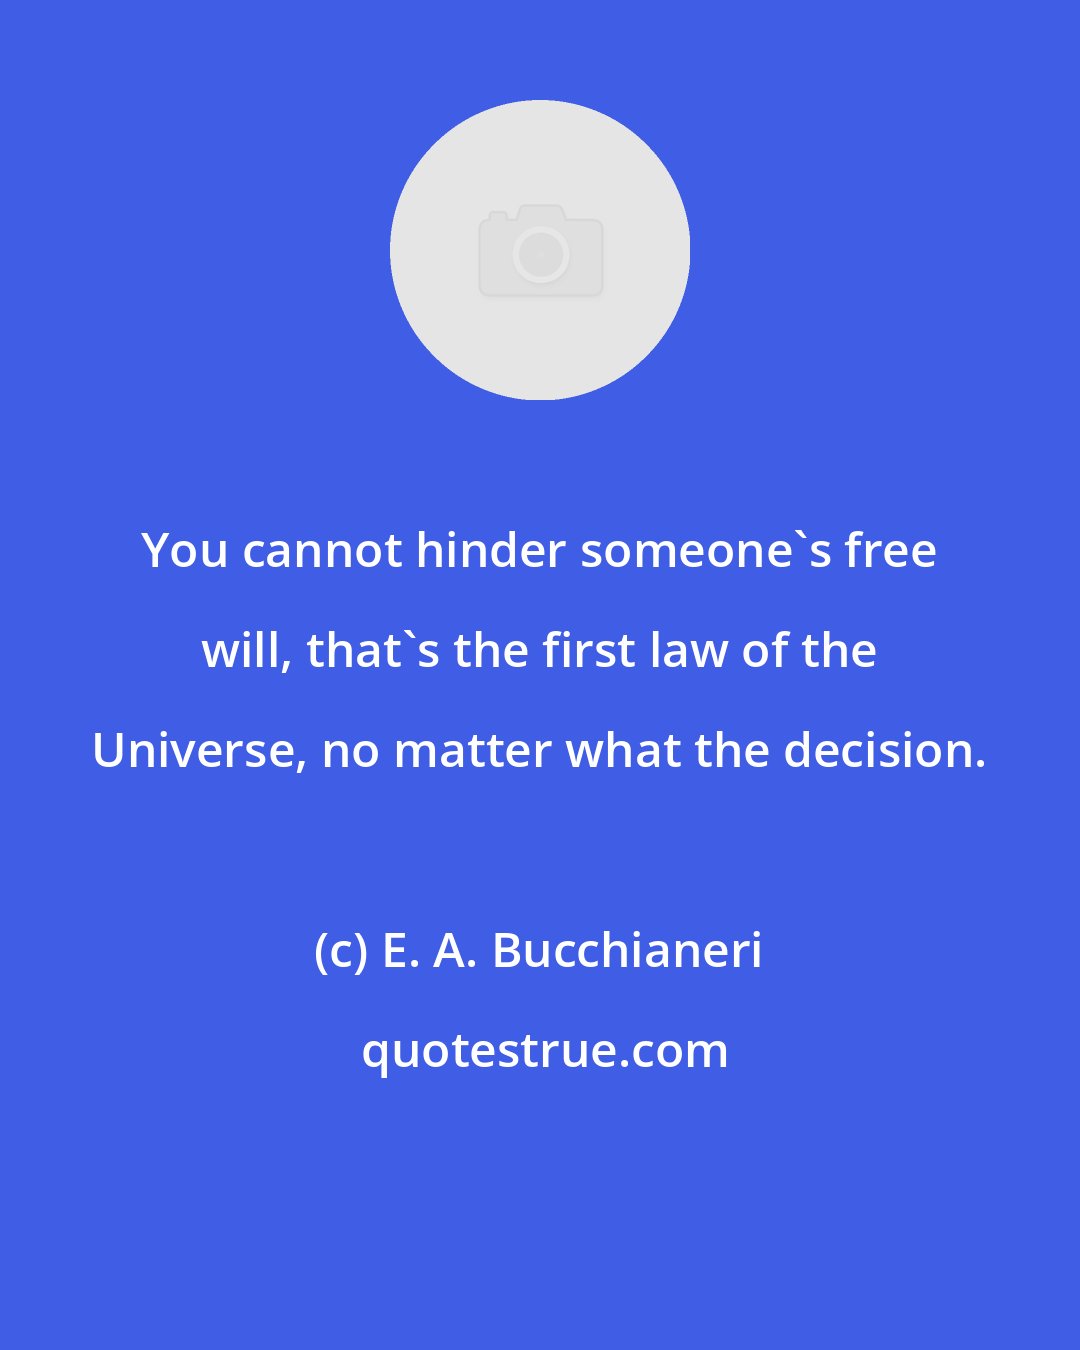 E. A. Bucchianeri: You cannot hinder someone's free will, that's the first law of the Universe, no matter what the decision.